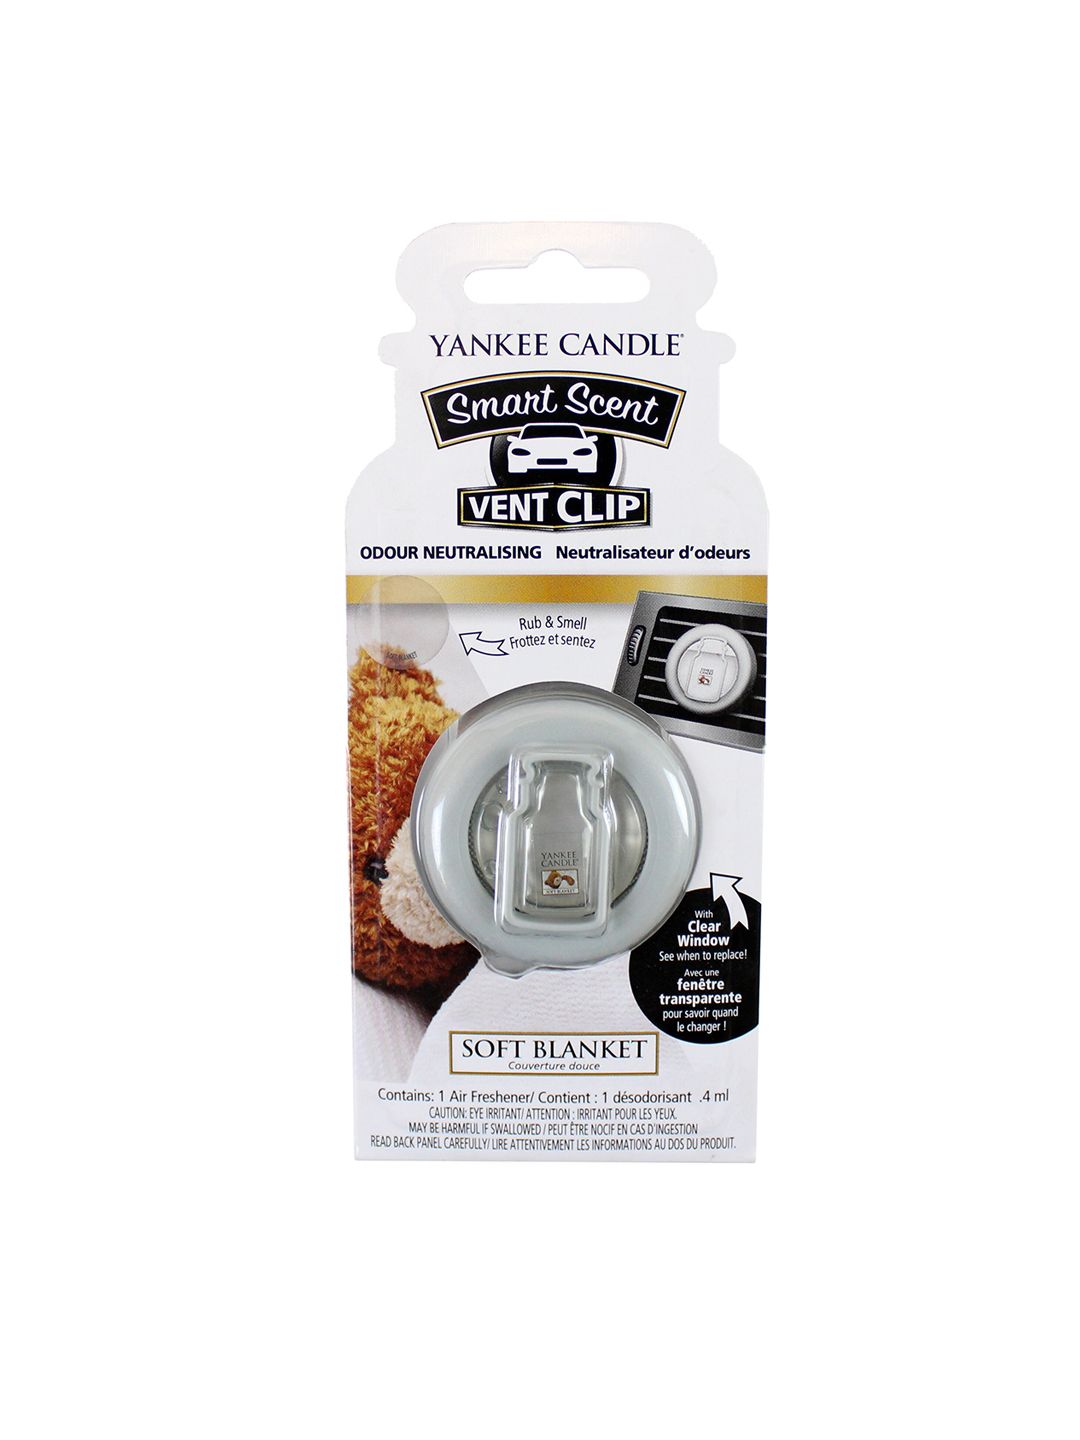 YANKEE CANDLE Soft Blanket Smart Scent Vent Clip Air Freshener Price in India